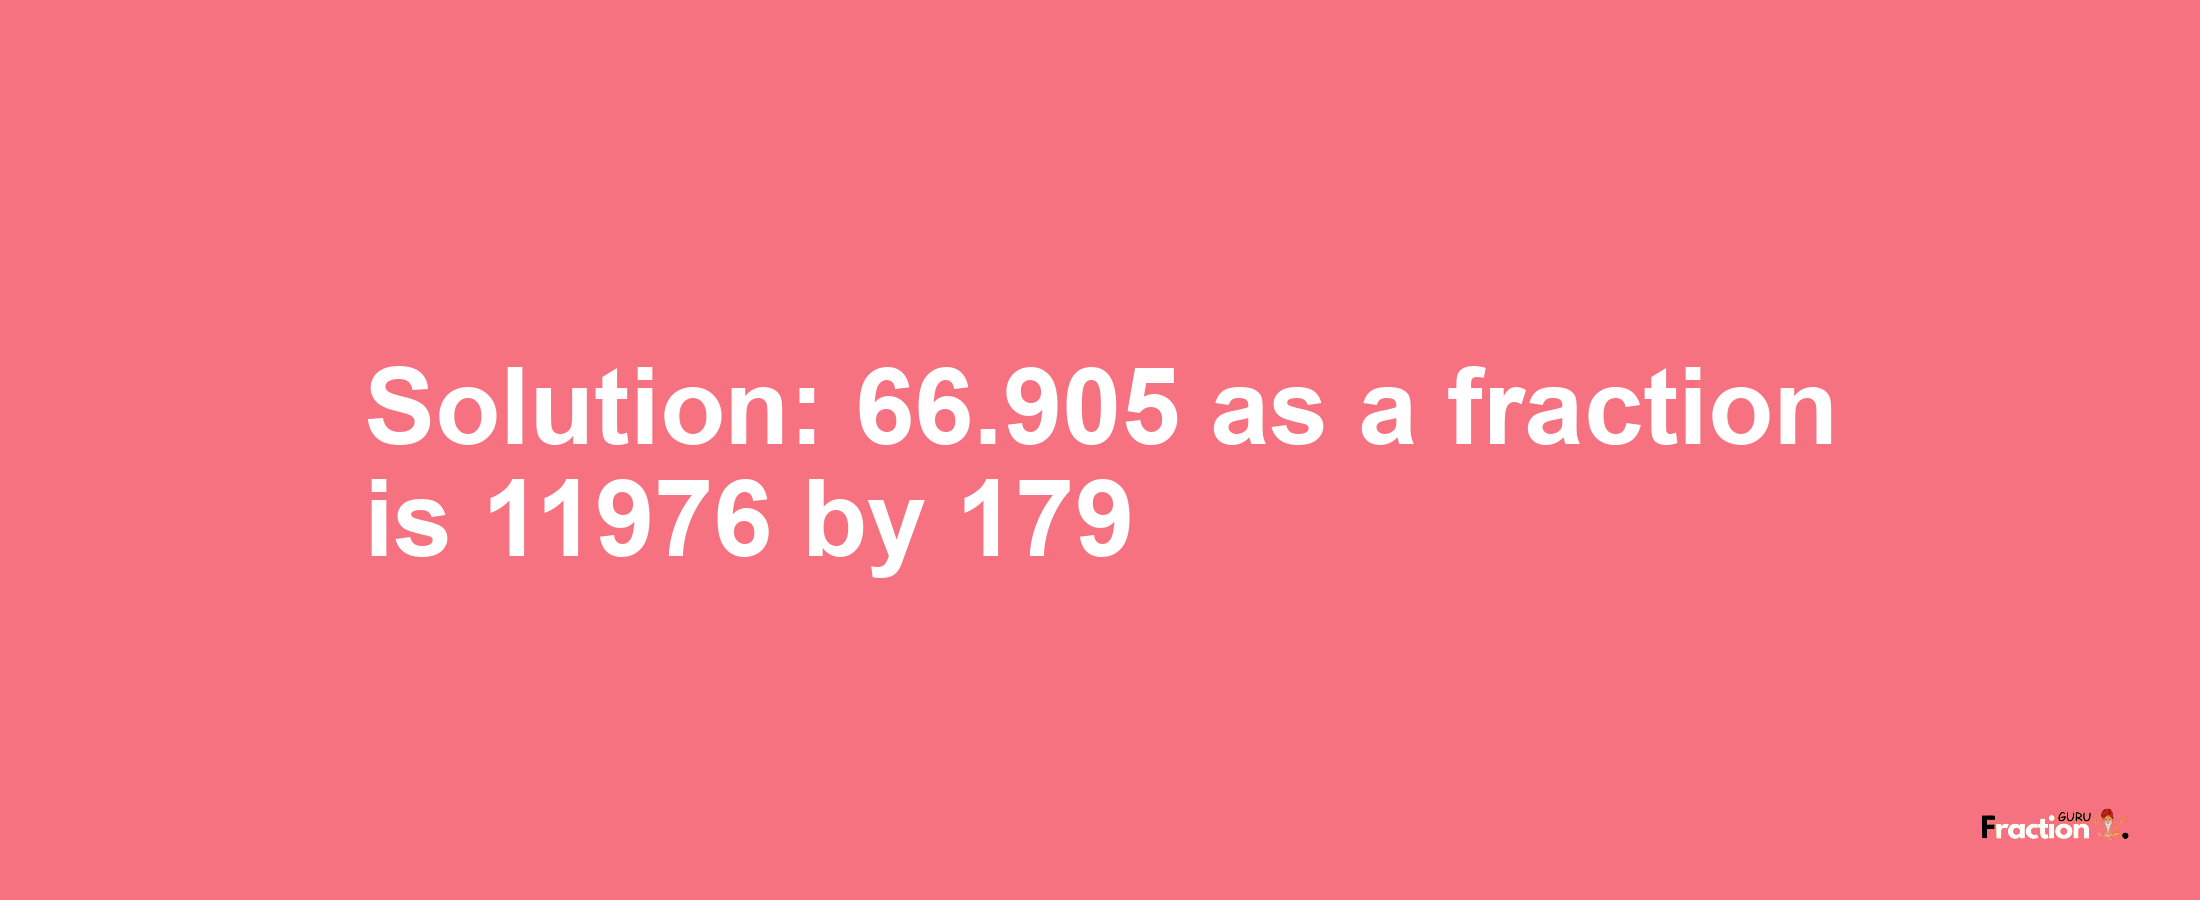 Solution:66.905 as a fraction is 11976/179